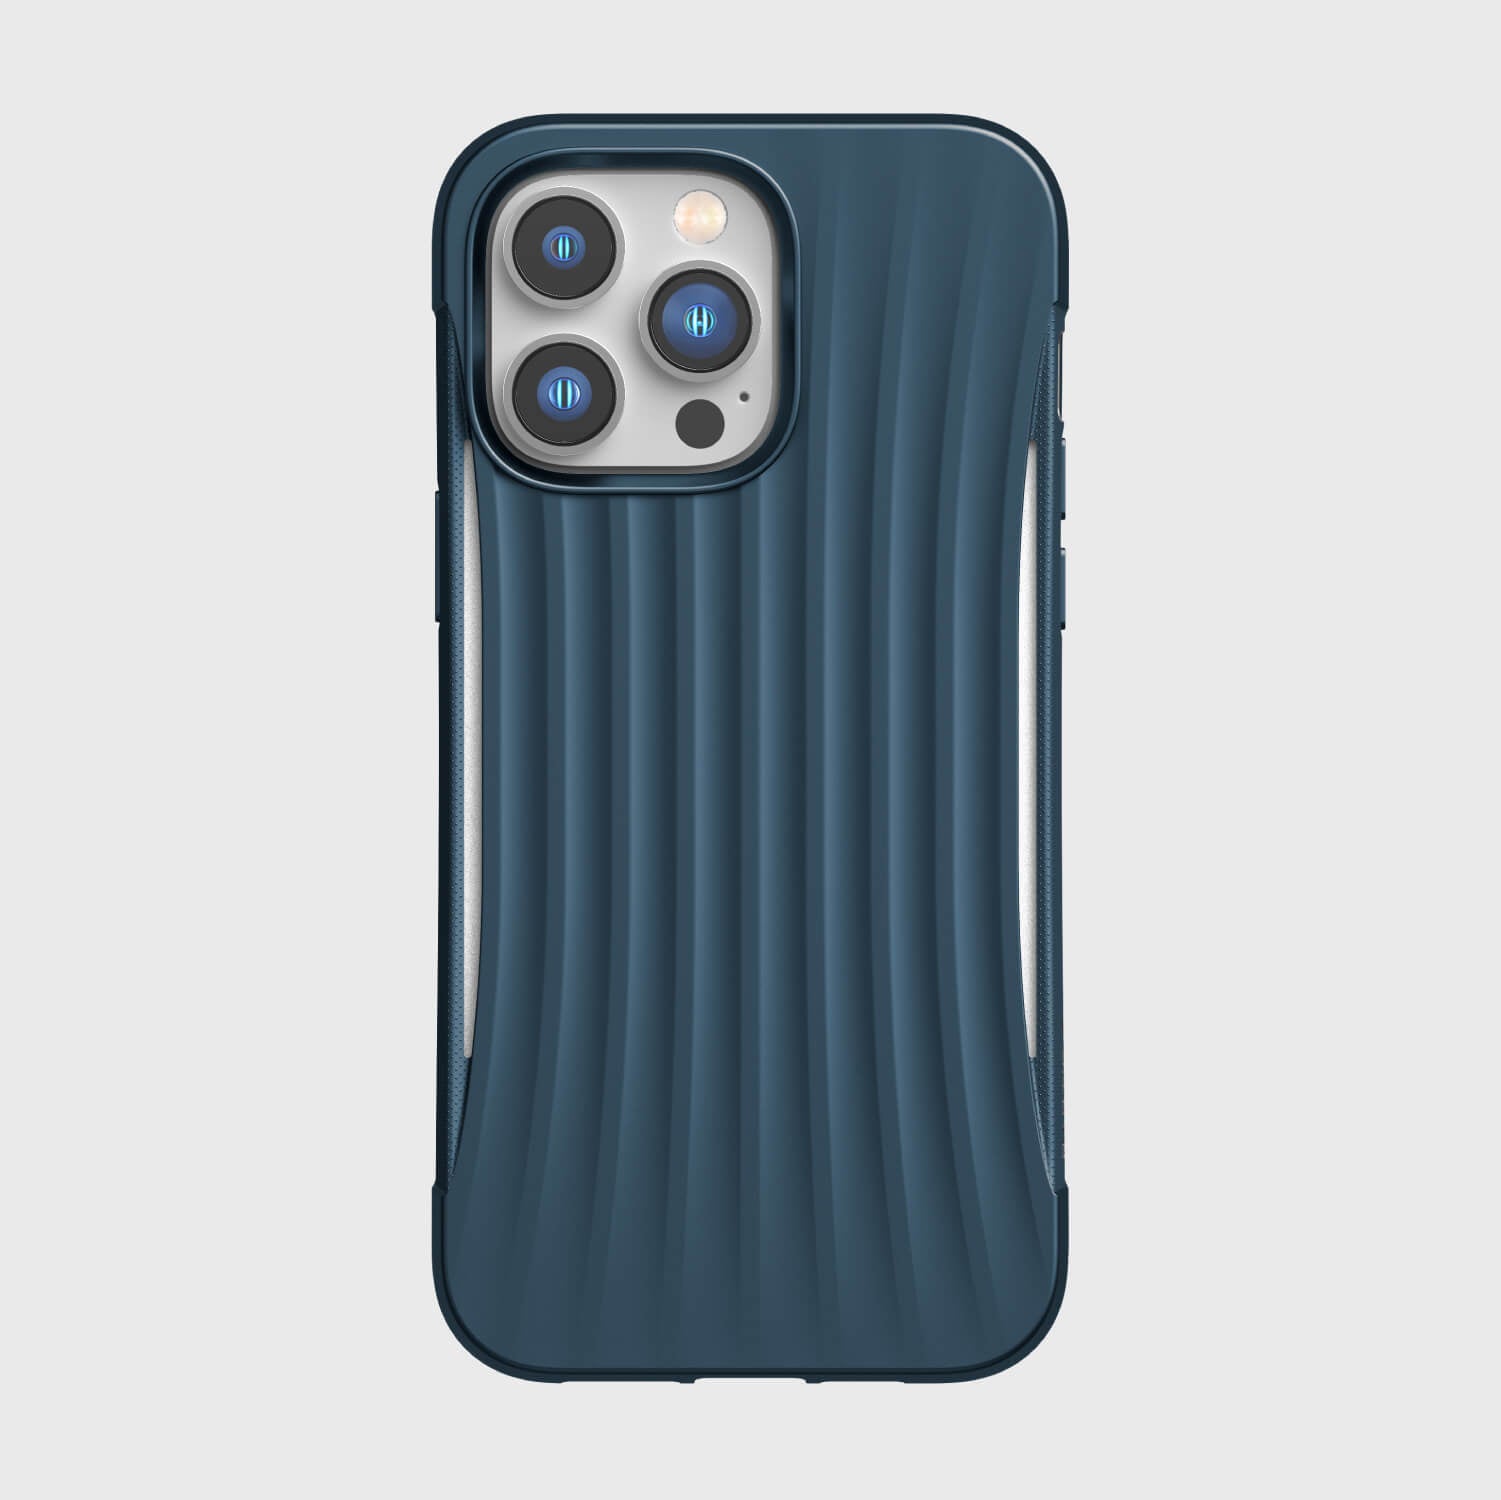 The biodegradable iPhone 14/15 Pro Max Case ~ Clutch, by Raptic, is shown in blue.